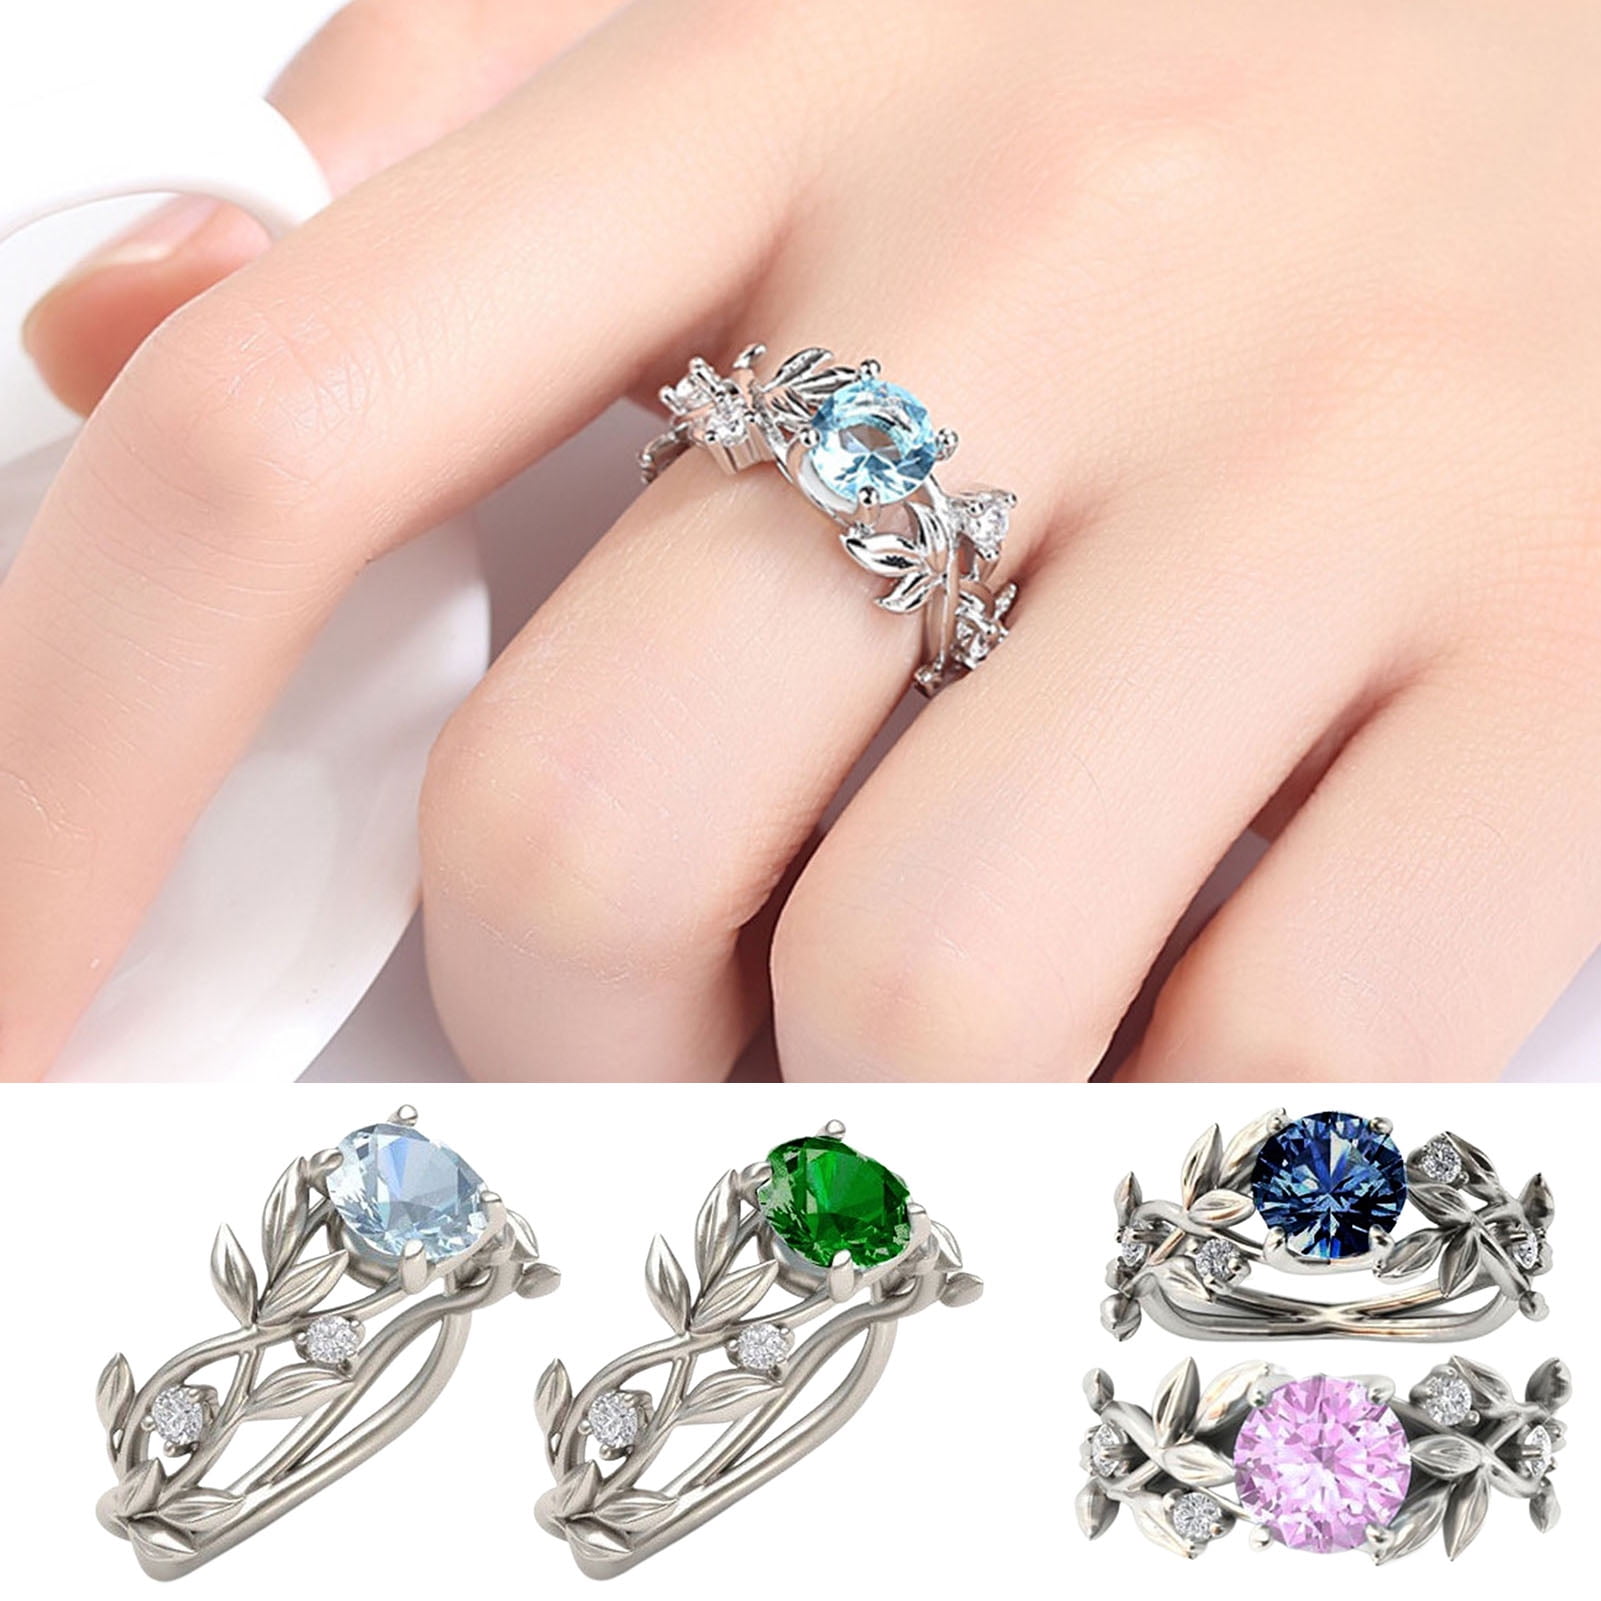 Biplut Women Ring Flowers Design All Match Accessories Fashion